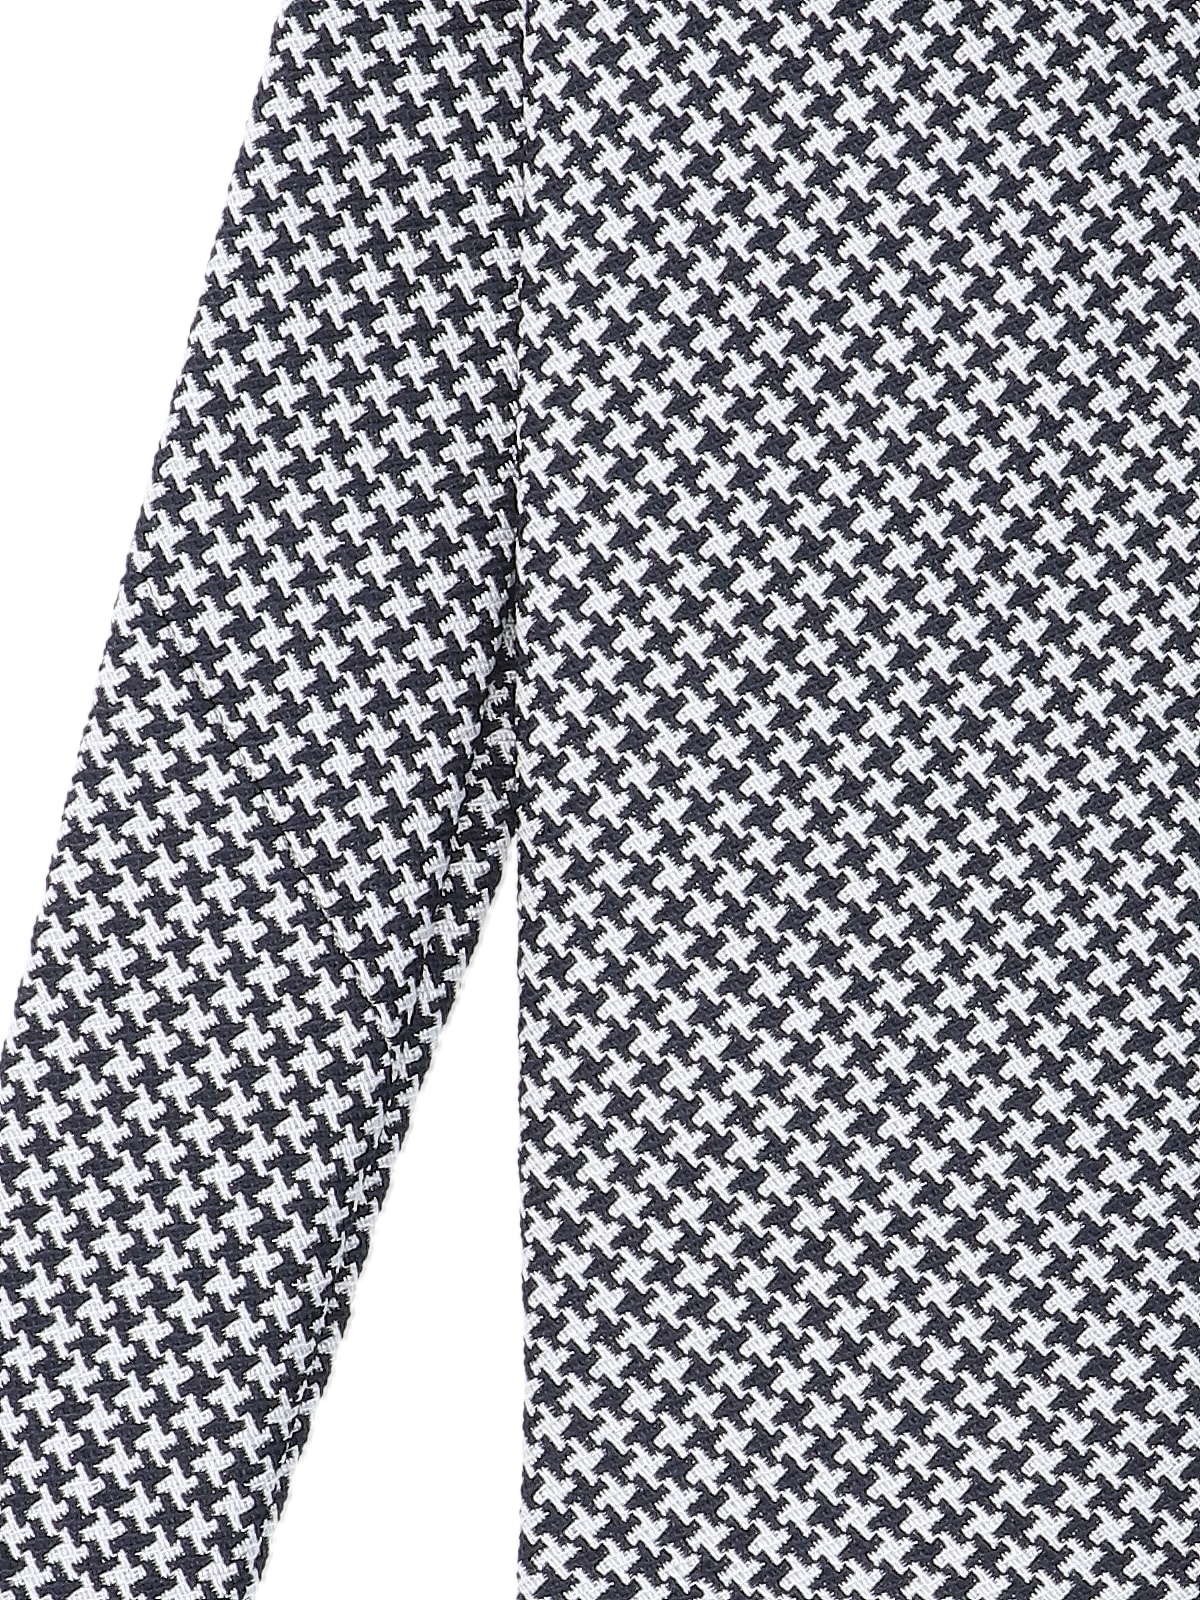 Shop Tom Ford Houndstooth Tie In Black